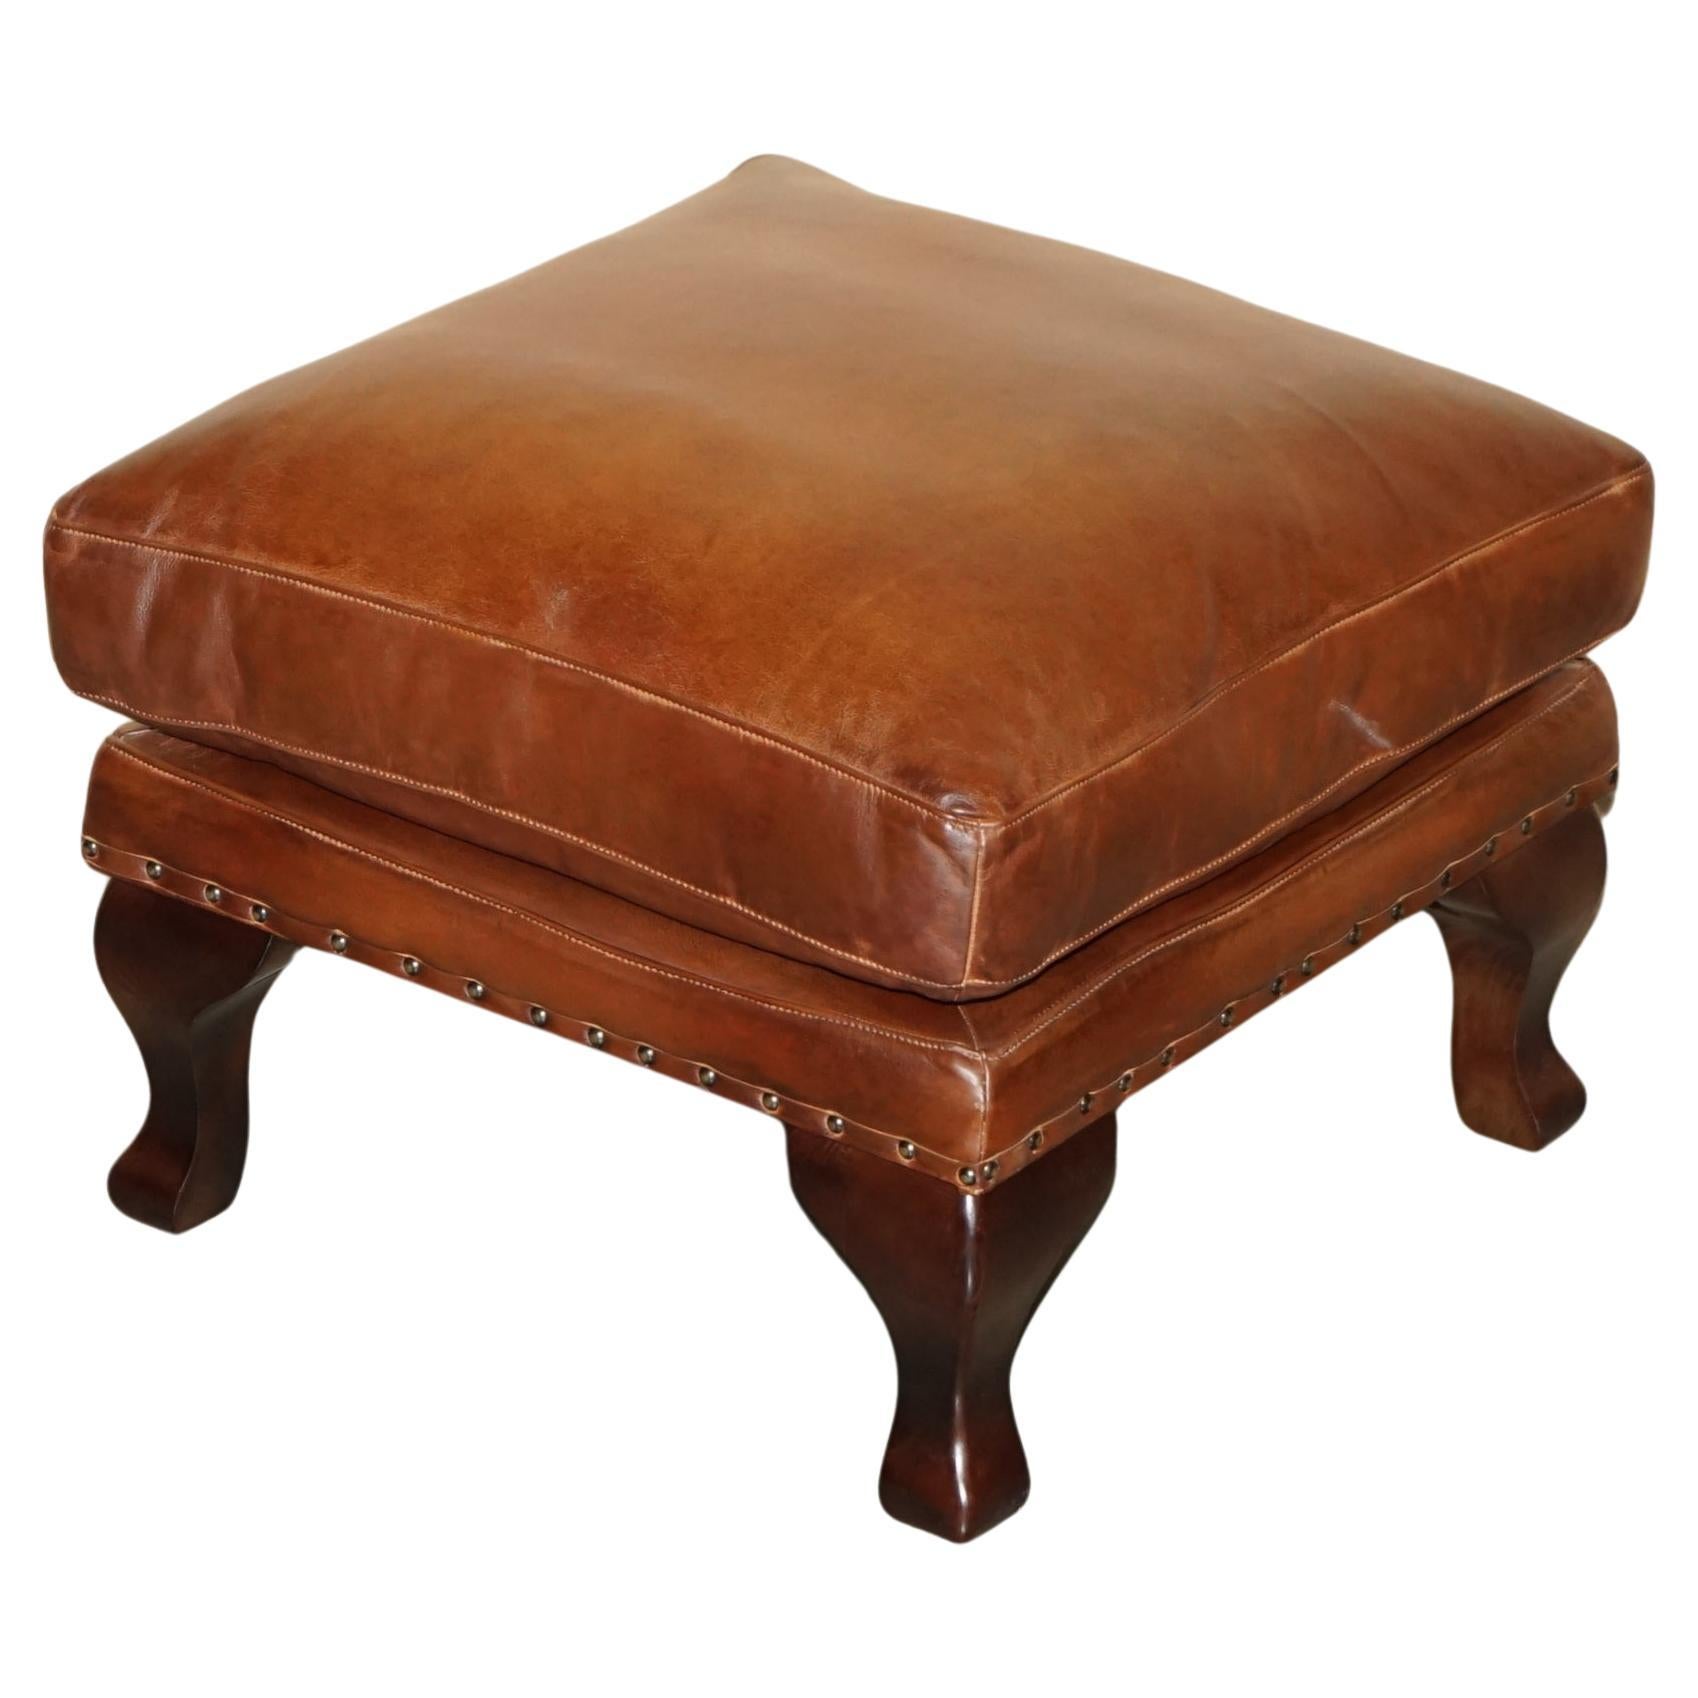 TETRAD BROWN LEATHER LARGE FOOTSTOOL LARGE ENoUGH FOR TWO PEOPLE TO SHARE